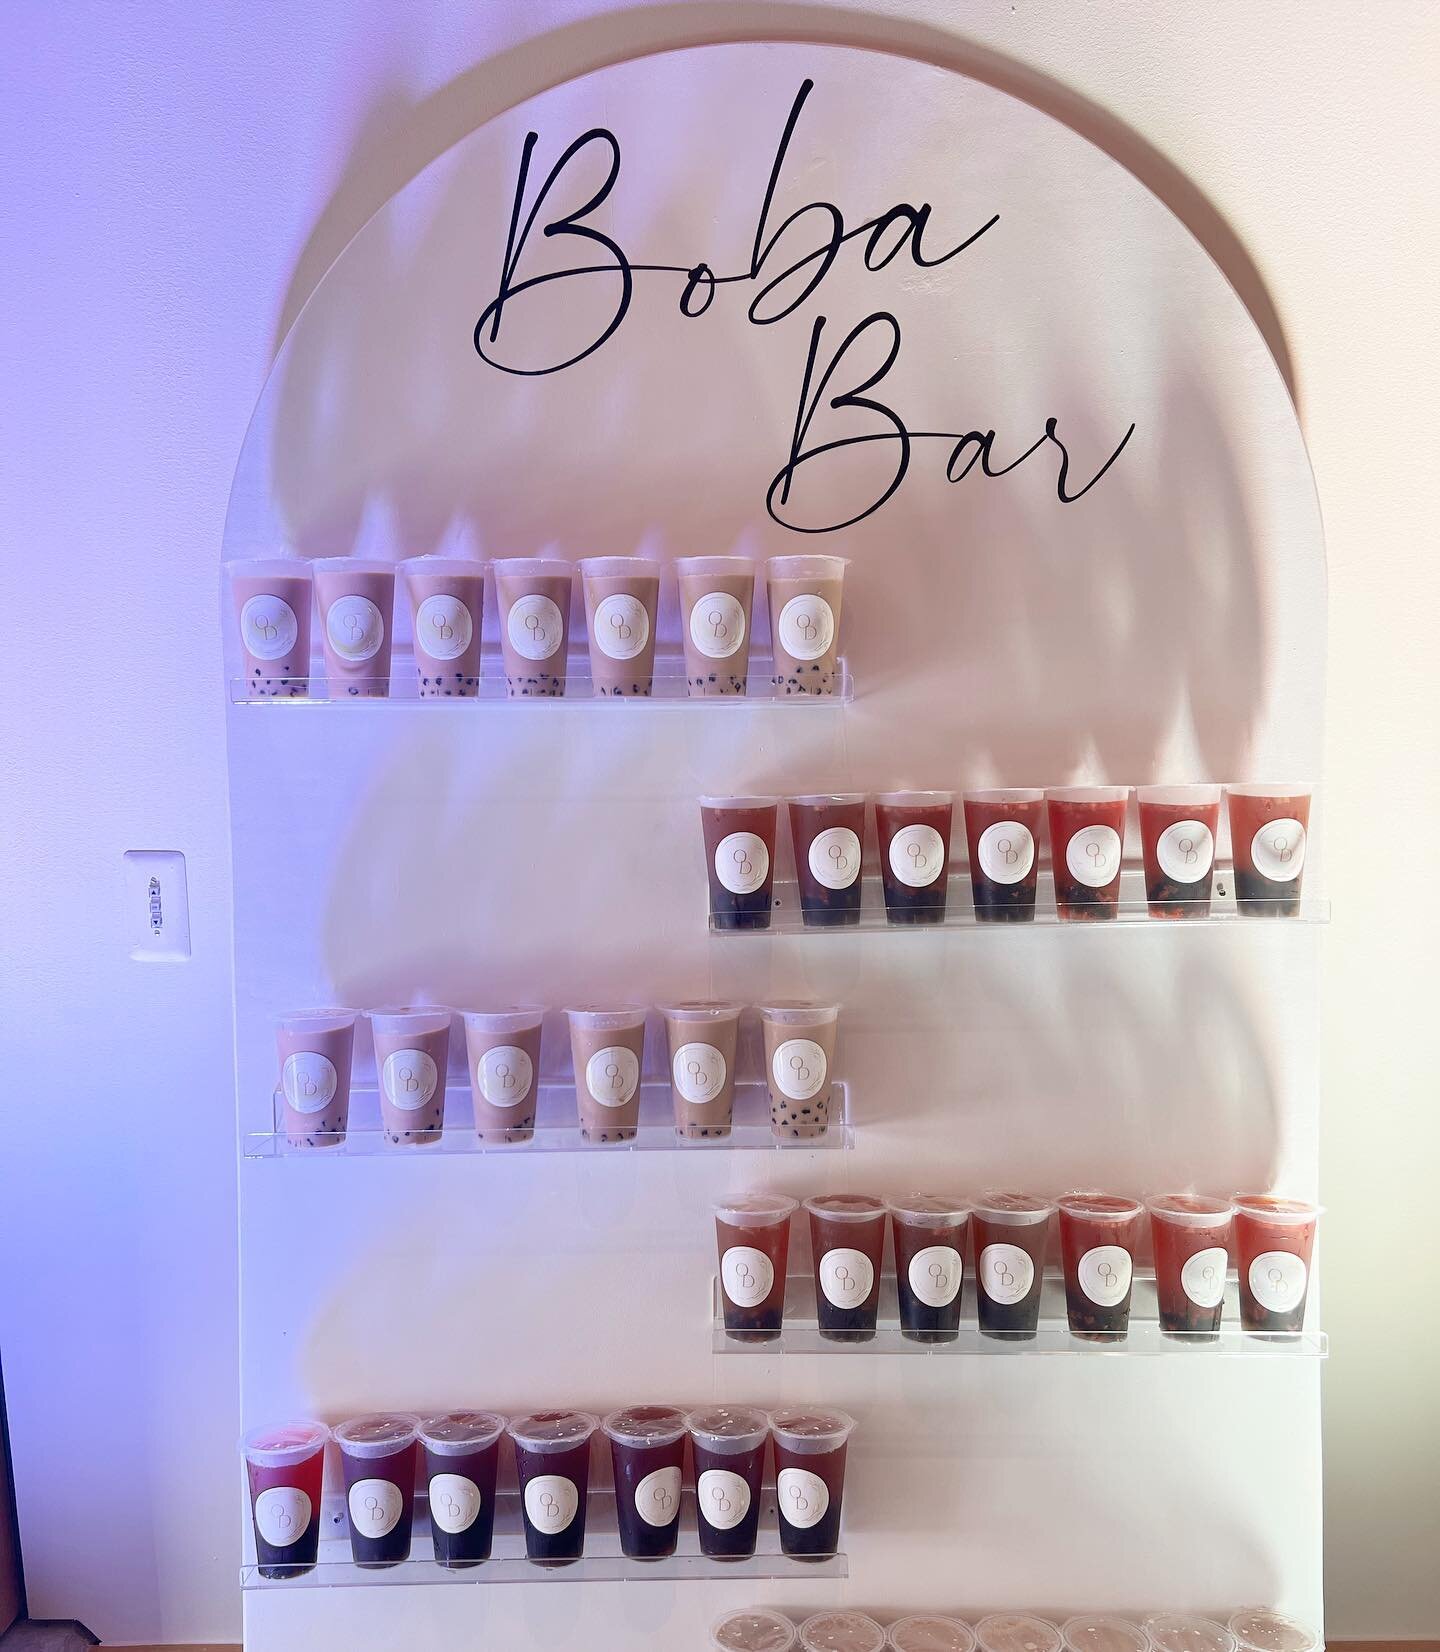 Another successful boba bar! Add our boba drinks to your boards, tables + more. 🌙

#boba
#bobacatering